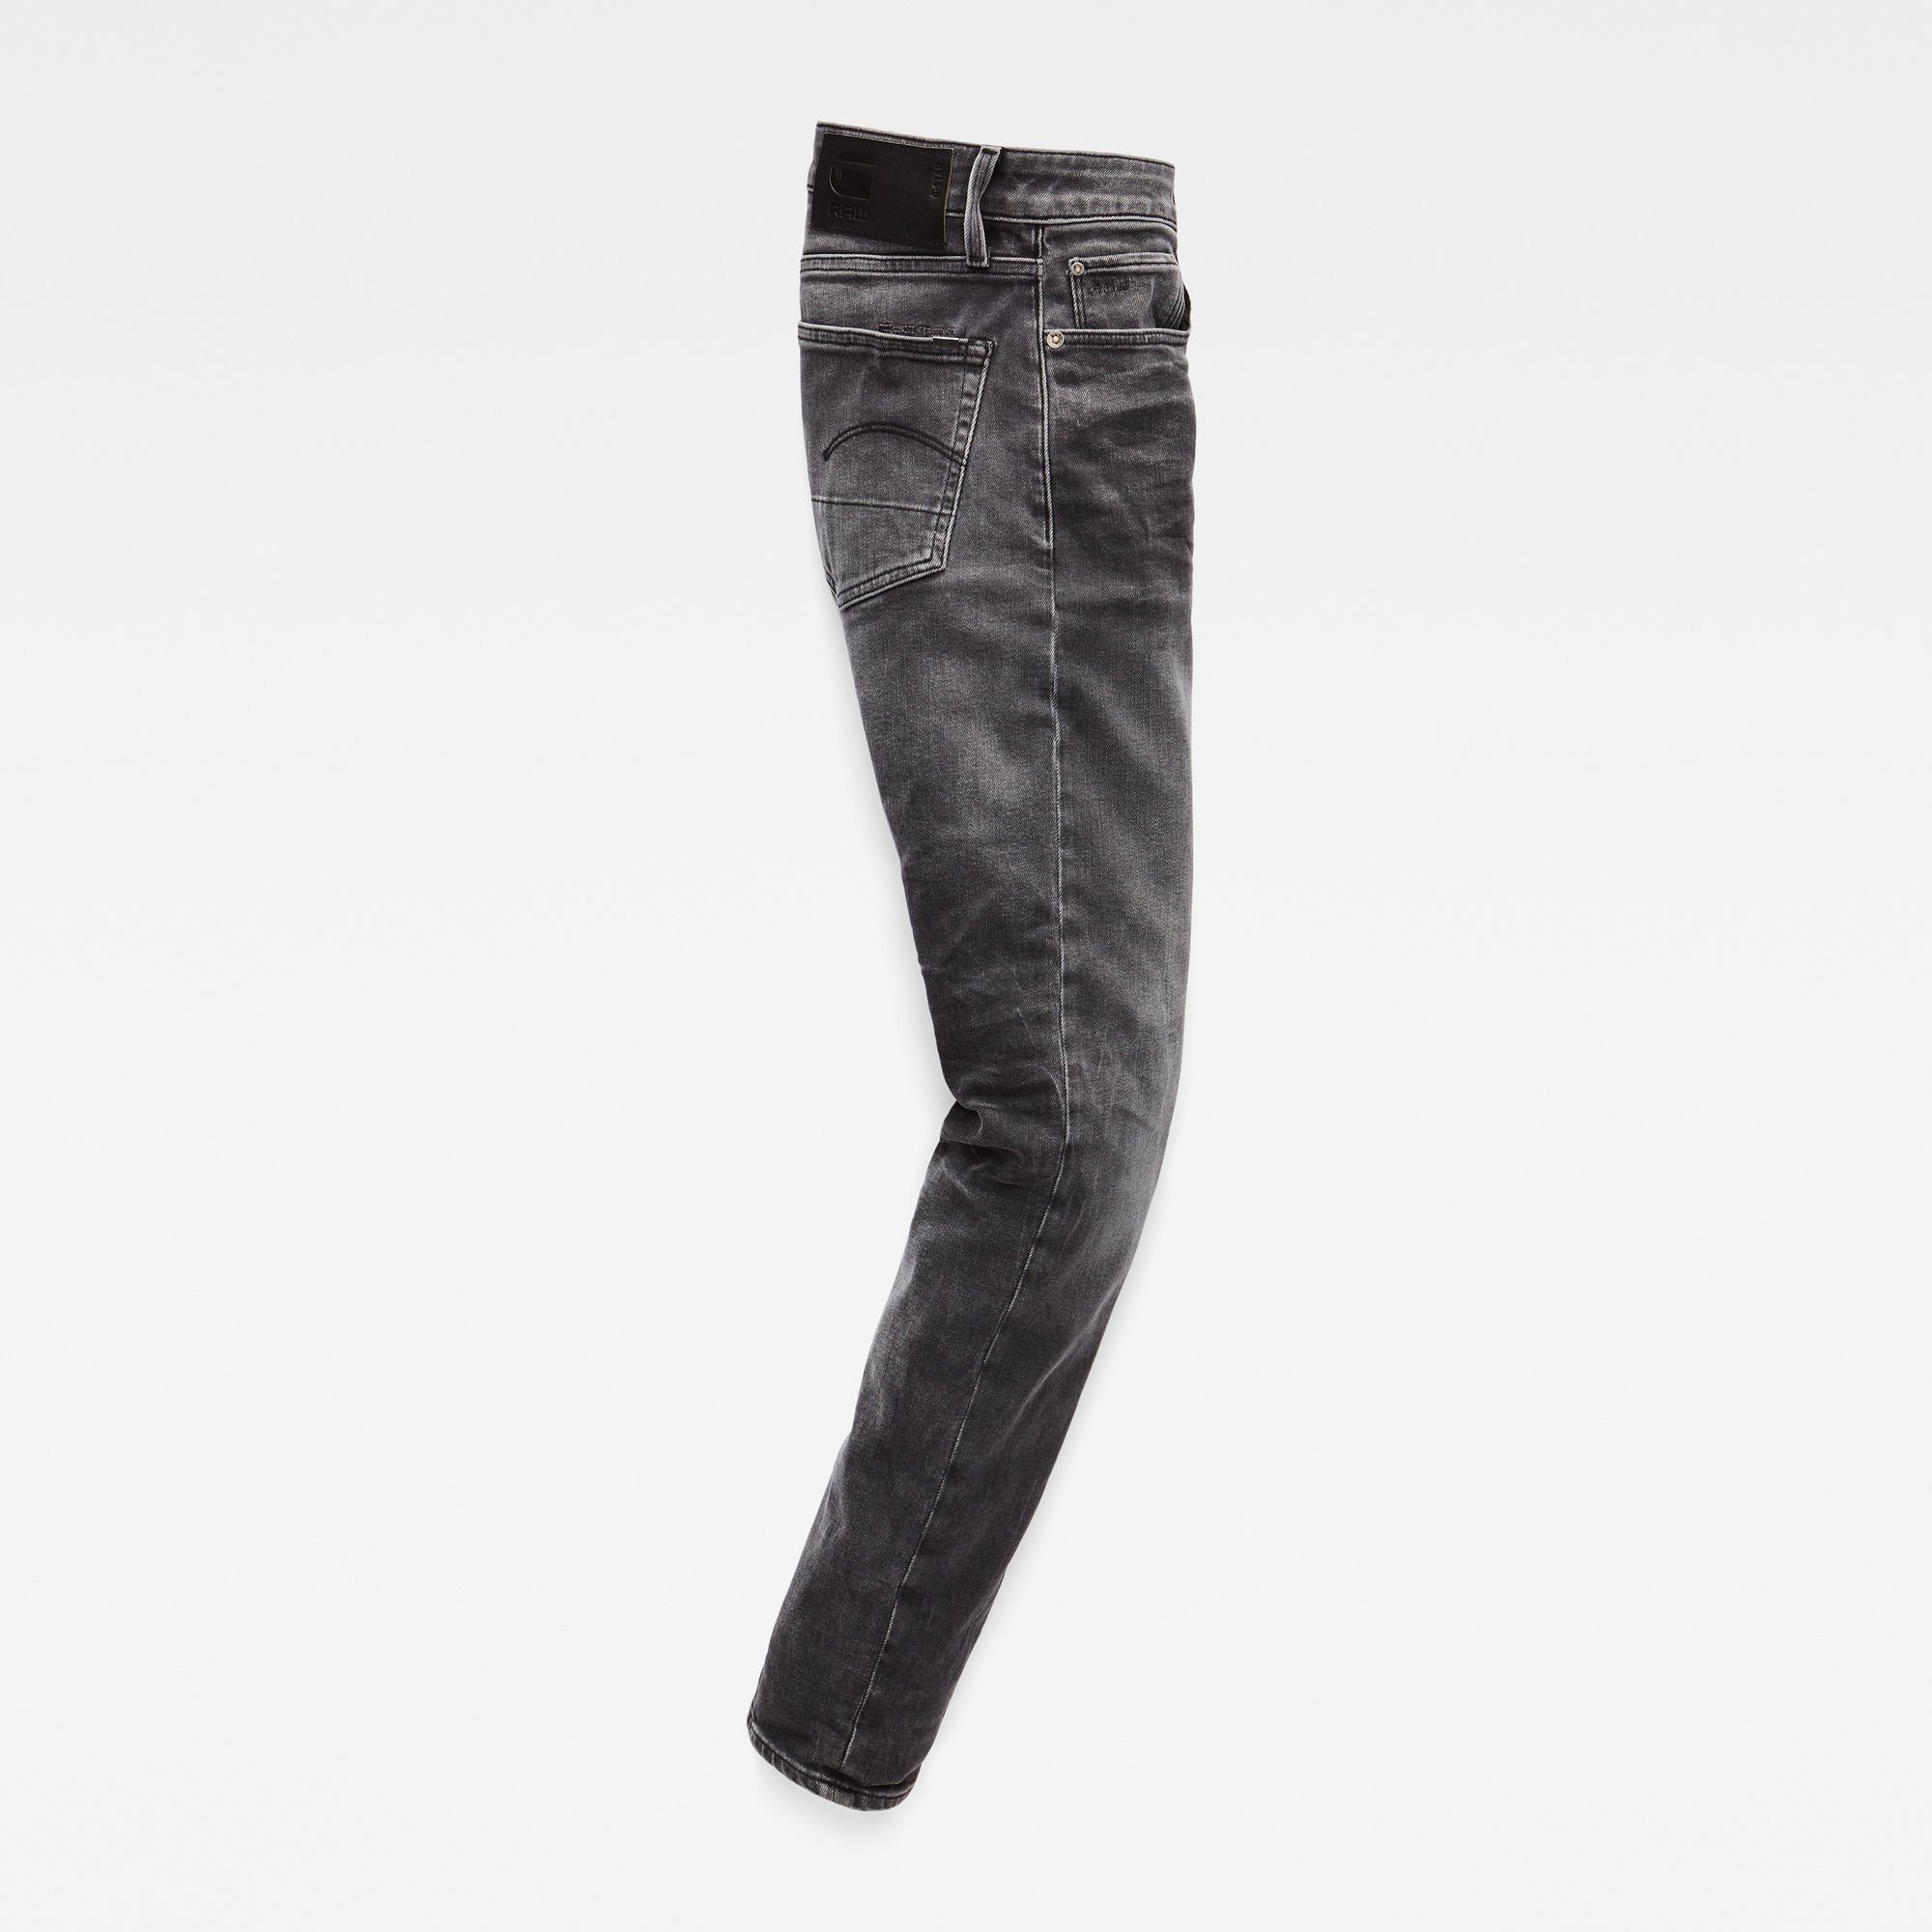 RAW G-Star Jeans Bequeme